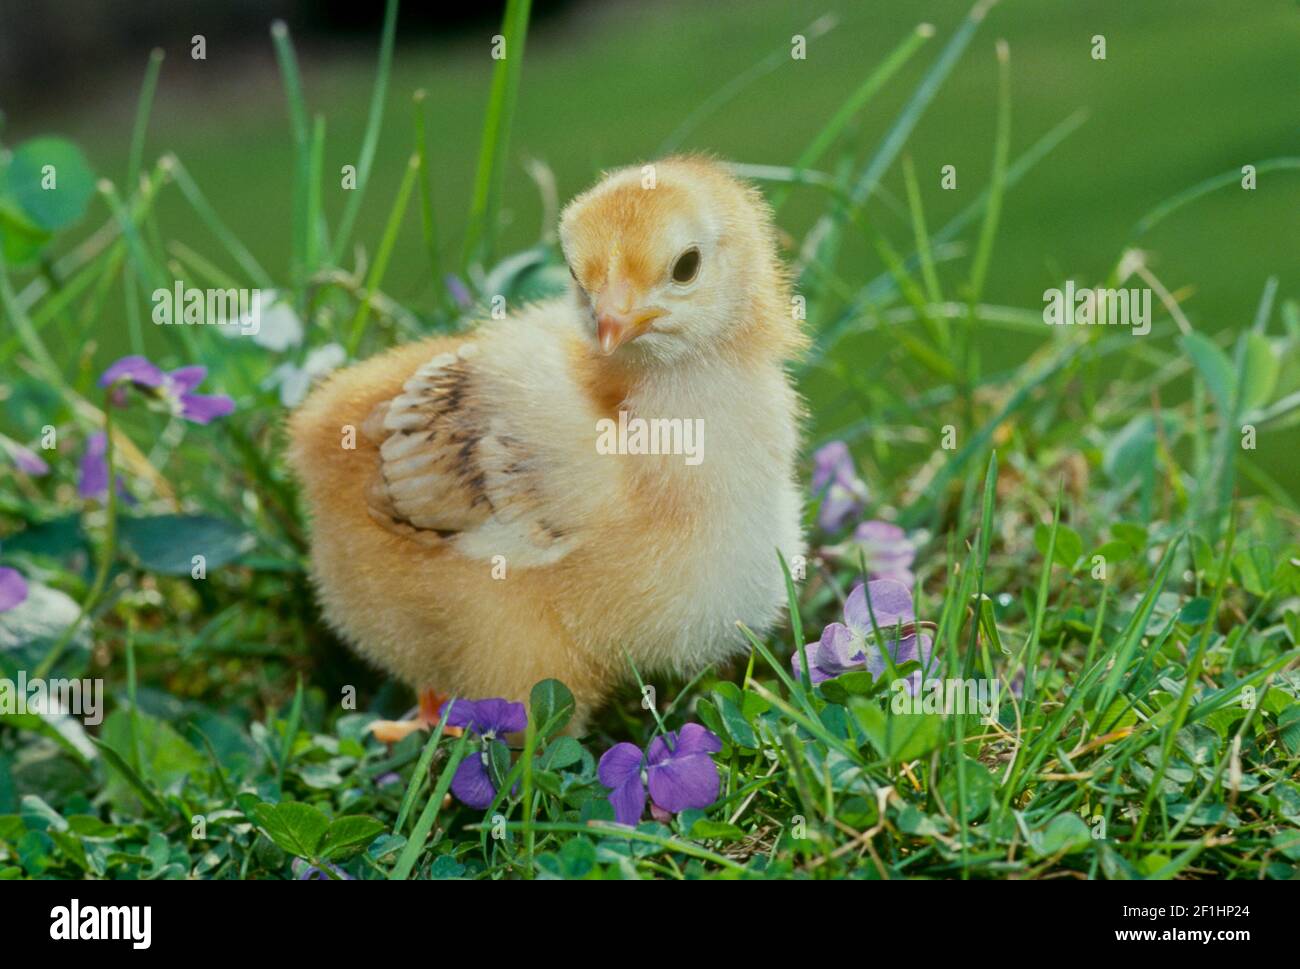 Adorable fuzzy Rhode Island red chick standing among violet flowers in the spring grass, Missouri USA Stock Photo